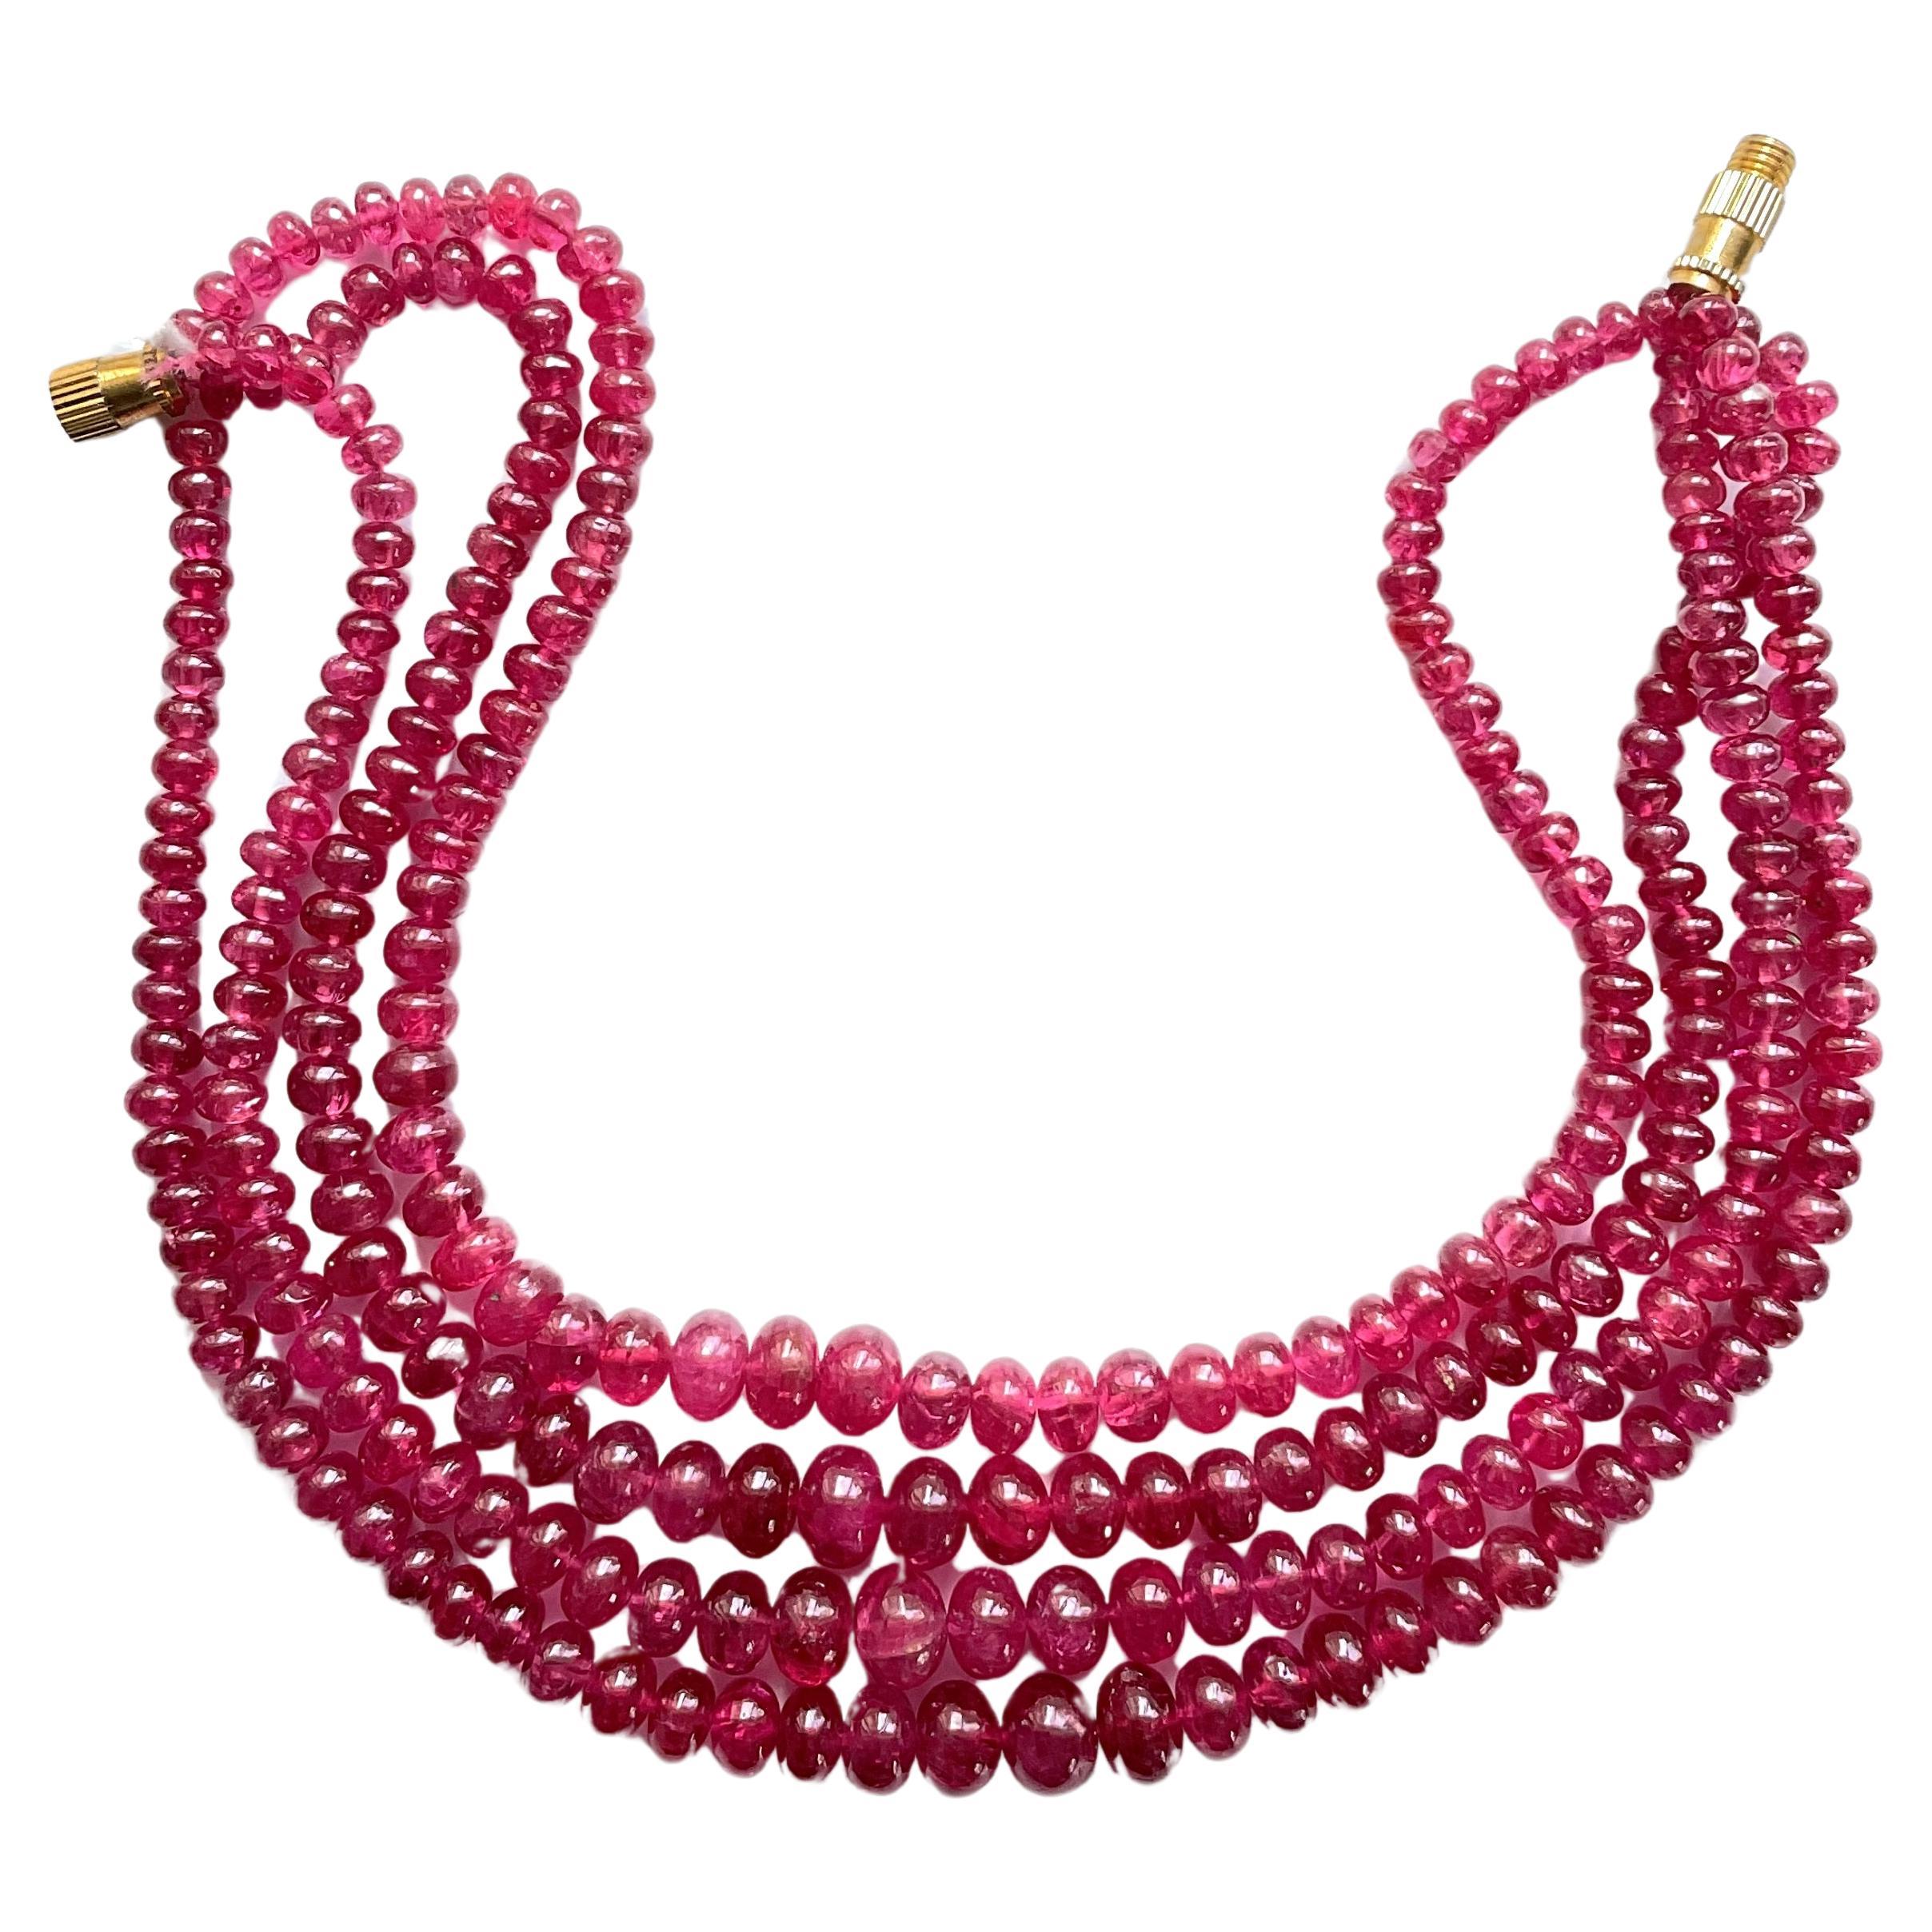 165.75 Carats Burma Red Spinel Beads Top Quality Beaded Necklace Natural Gem